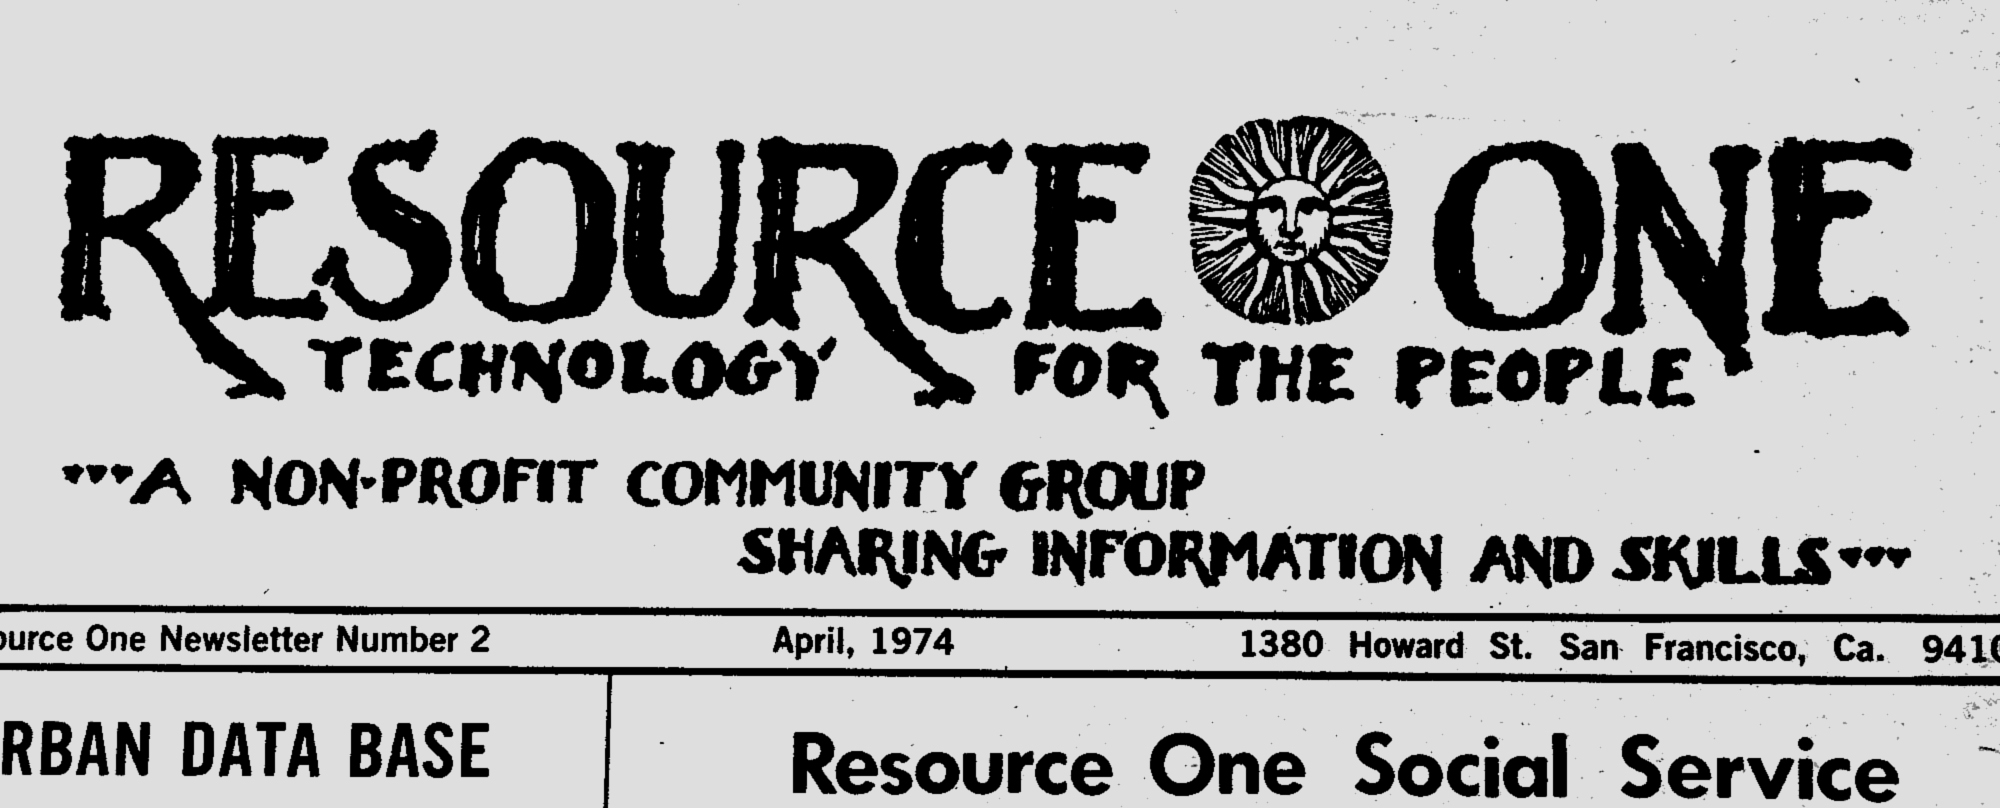 Resource One newsletter, 1974. Photo from the Computer History Museum.